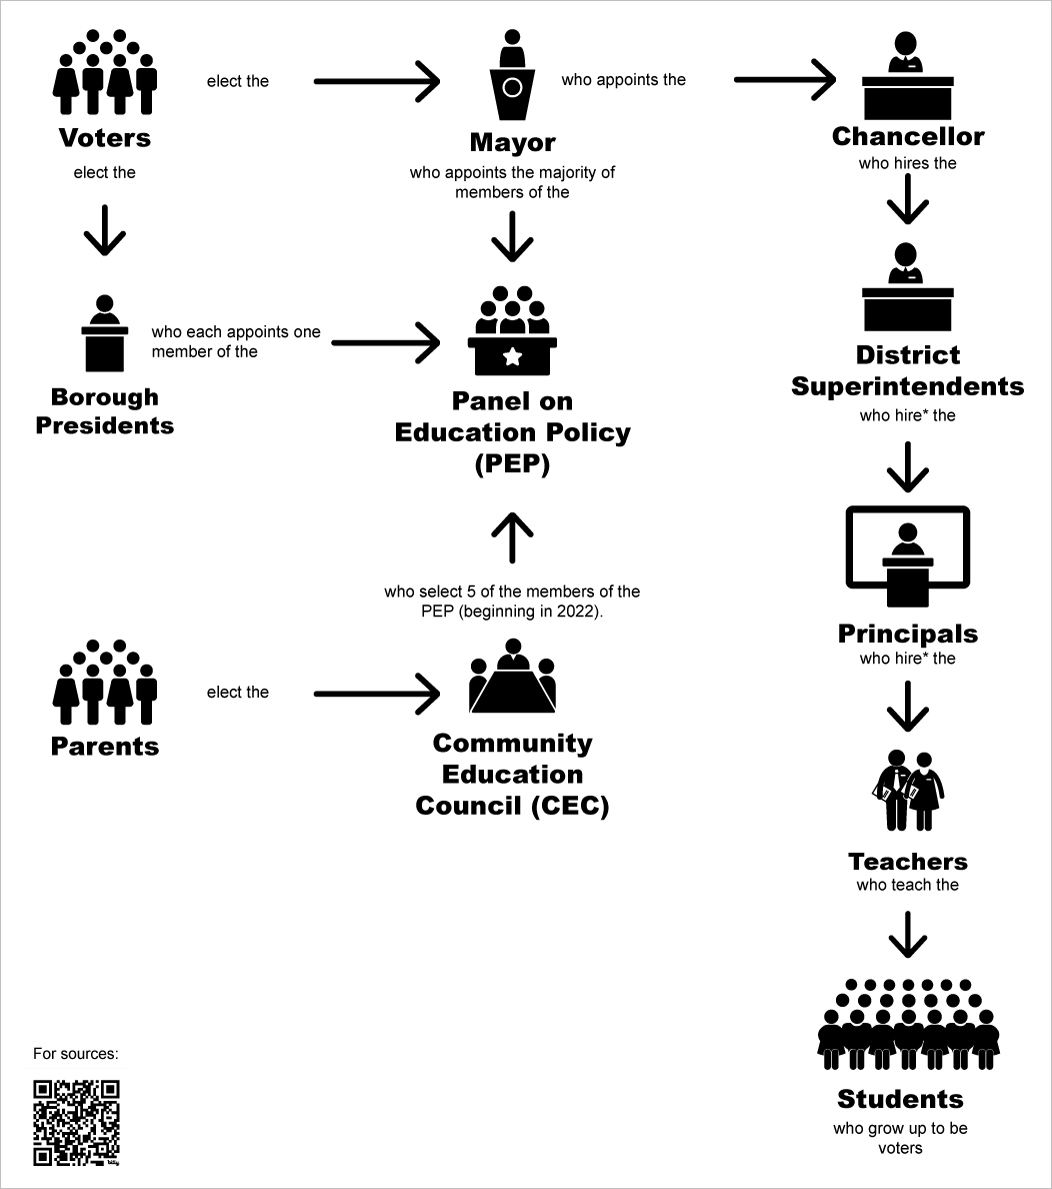 Diagram showing the relationship between voters, the mayor, community education council, panel on education policy and the school system